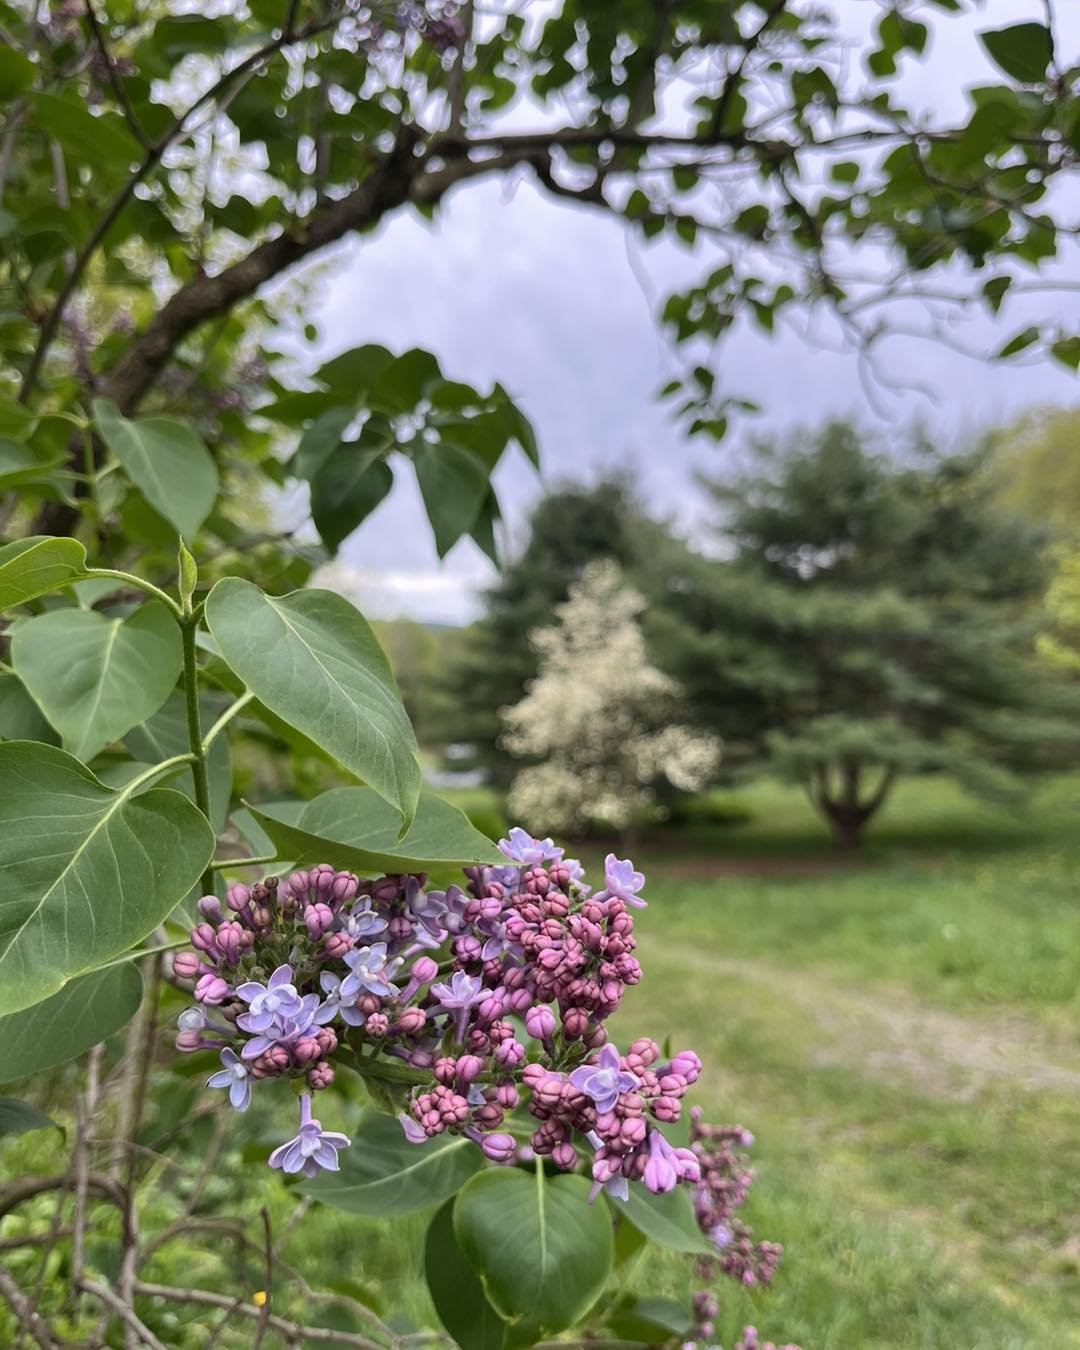 Our lilacs are just starting to bloom and the magnolia is in full bloom in the background!! 😍

#magnolia  #magnoliatree #lilac #lilacseason #springflowers